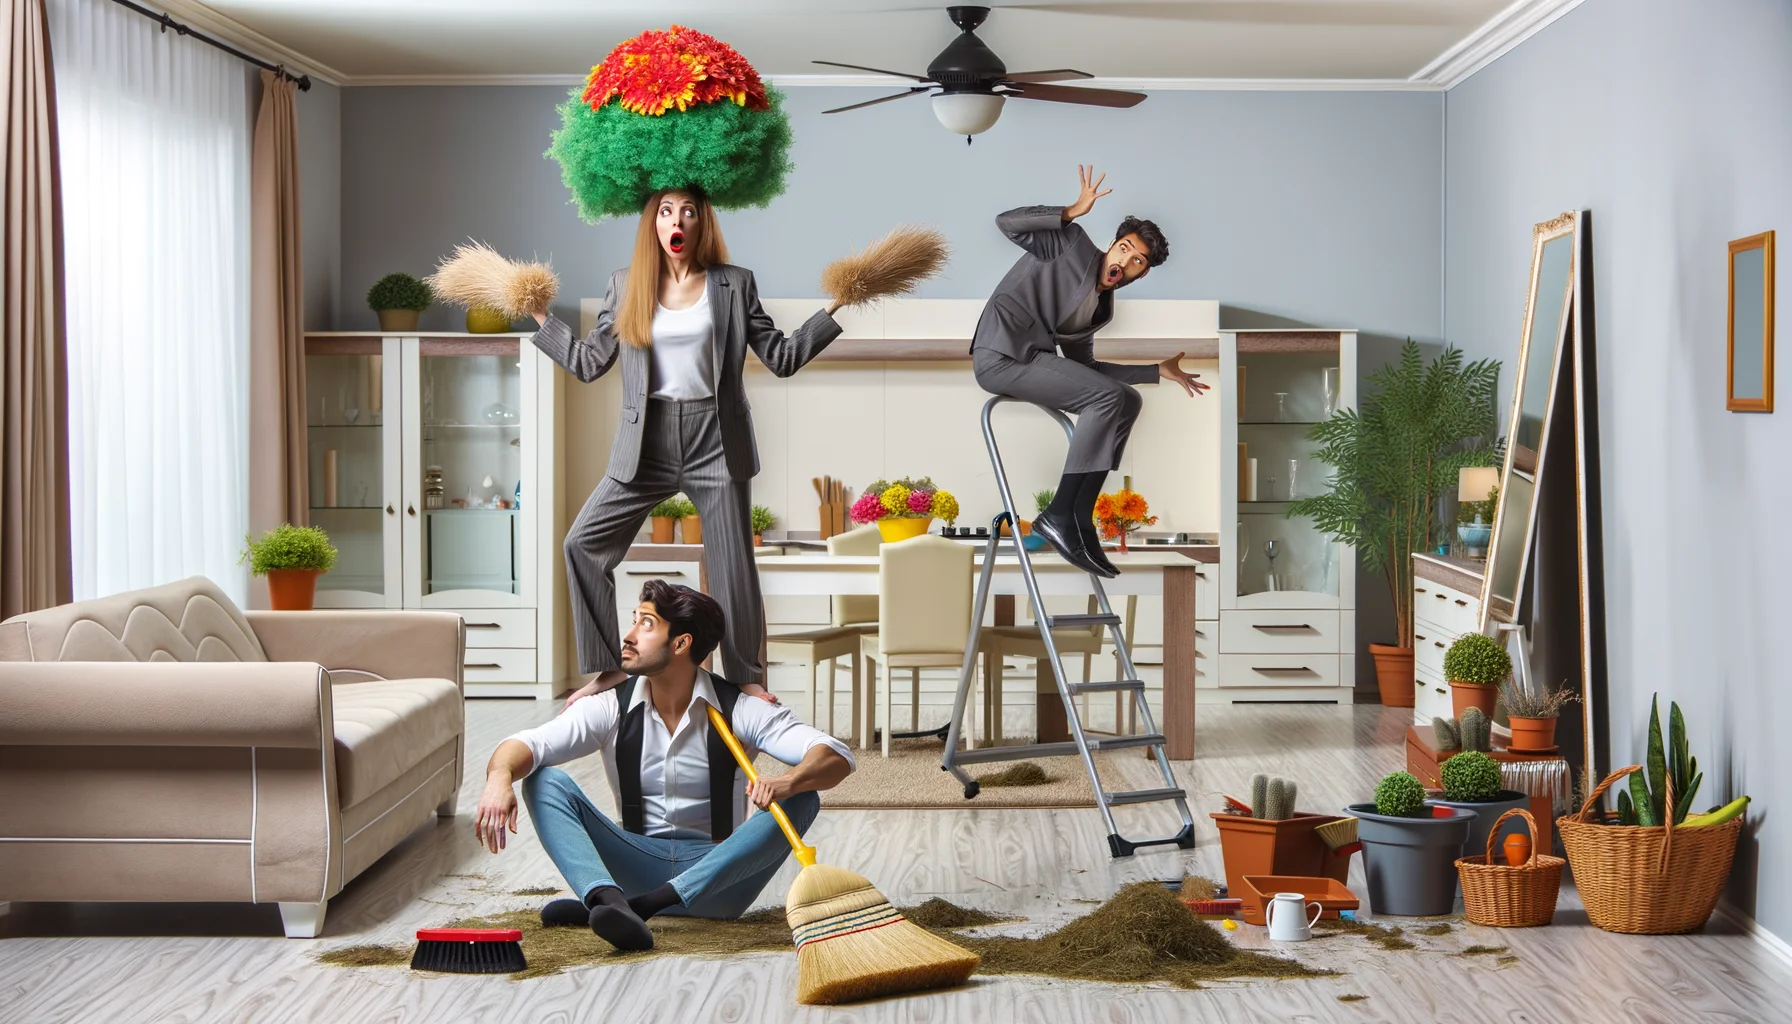 An image set in a domestic interior of a house showcasing hilariously exaggerated home staging tips for sellers. A Caucasian female seller dramatically sweeping the floor with an oversized broom and a Middle-Eastern male seller perched precariously on a ladder while balancing a vibrant potted plant on his head. They are both exchanging bewildered glances. This room in chaos is contrasted with a perfectly arranged room in the reflection of a mirror on the wall, symbolizing the goal of their home staging efforts.